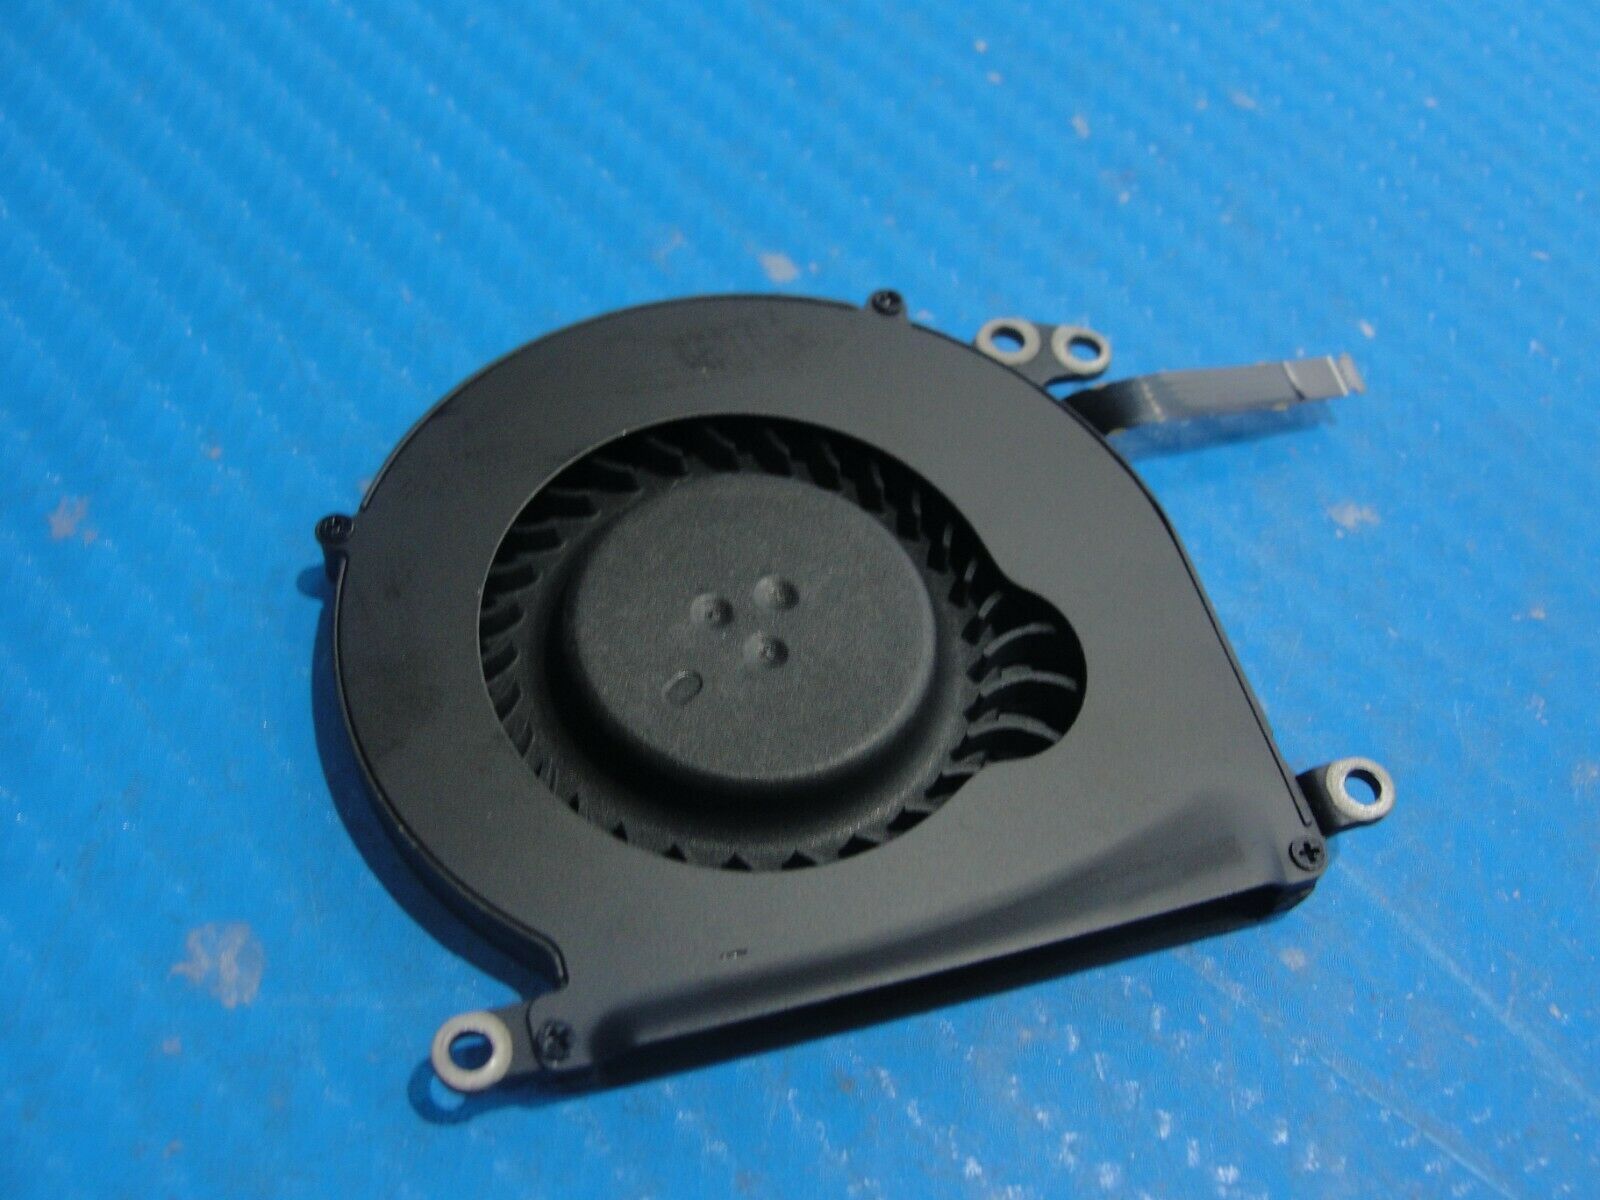 MacBook Air 11" A1465 2012 MD223LL/A Genuine CPU Cooling Fan 922-9973 - Laptop Parts - Buy Authentic Computer Parts - Top Seller Ebay